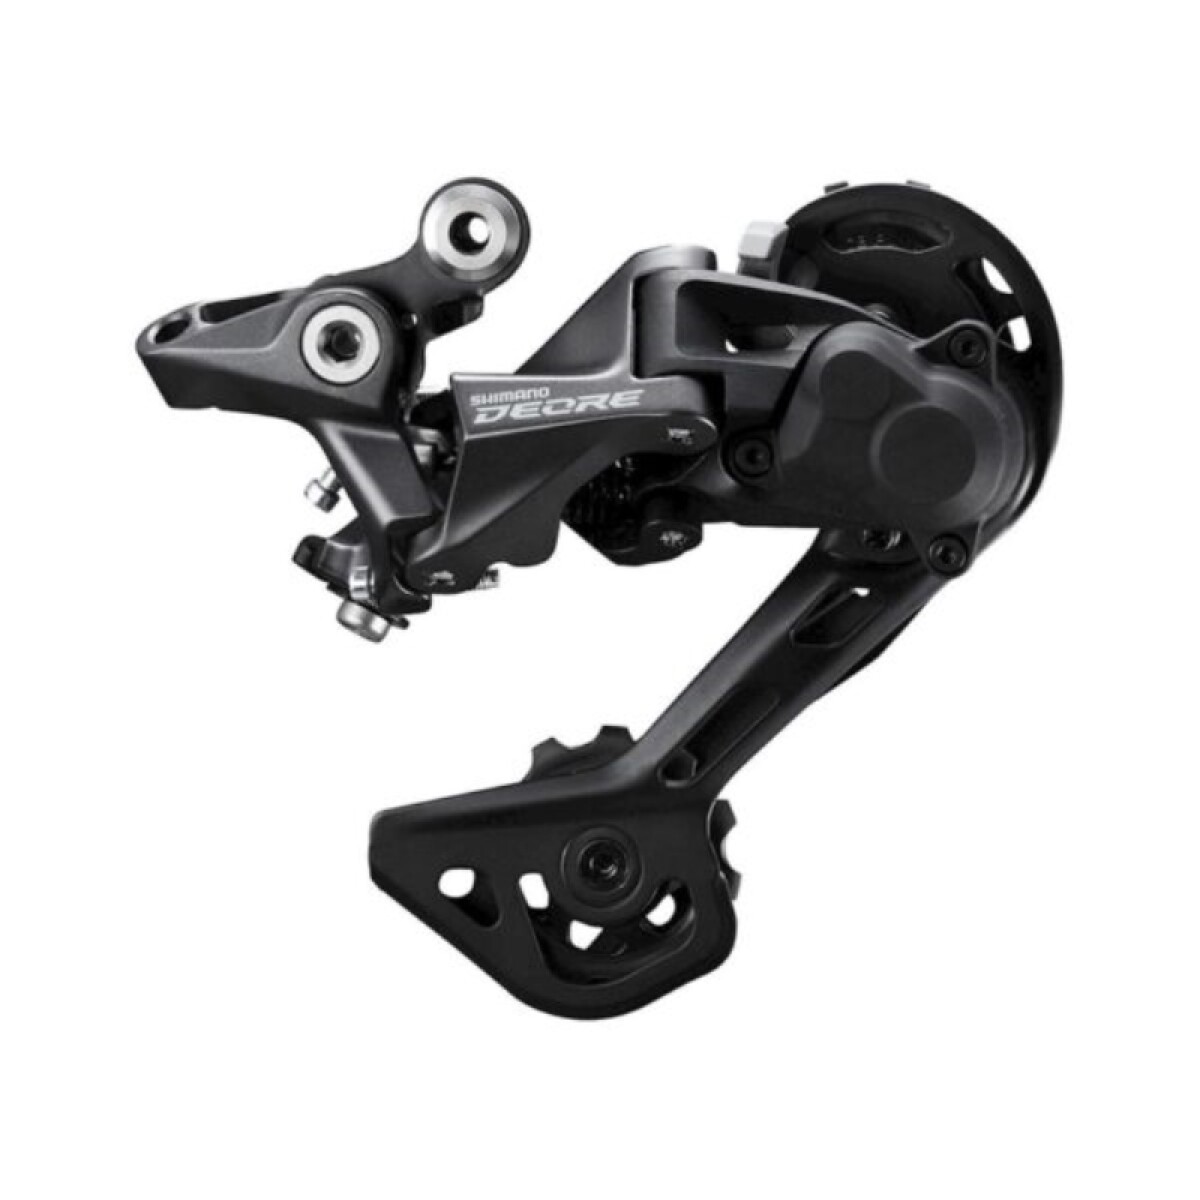 Cambio Mtb Shimano Deore M5120 ( 10 Vely 11 Vel ) 